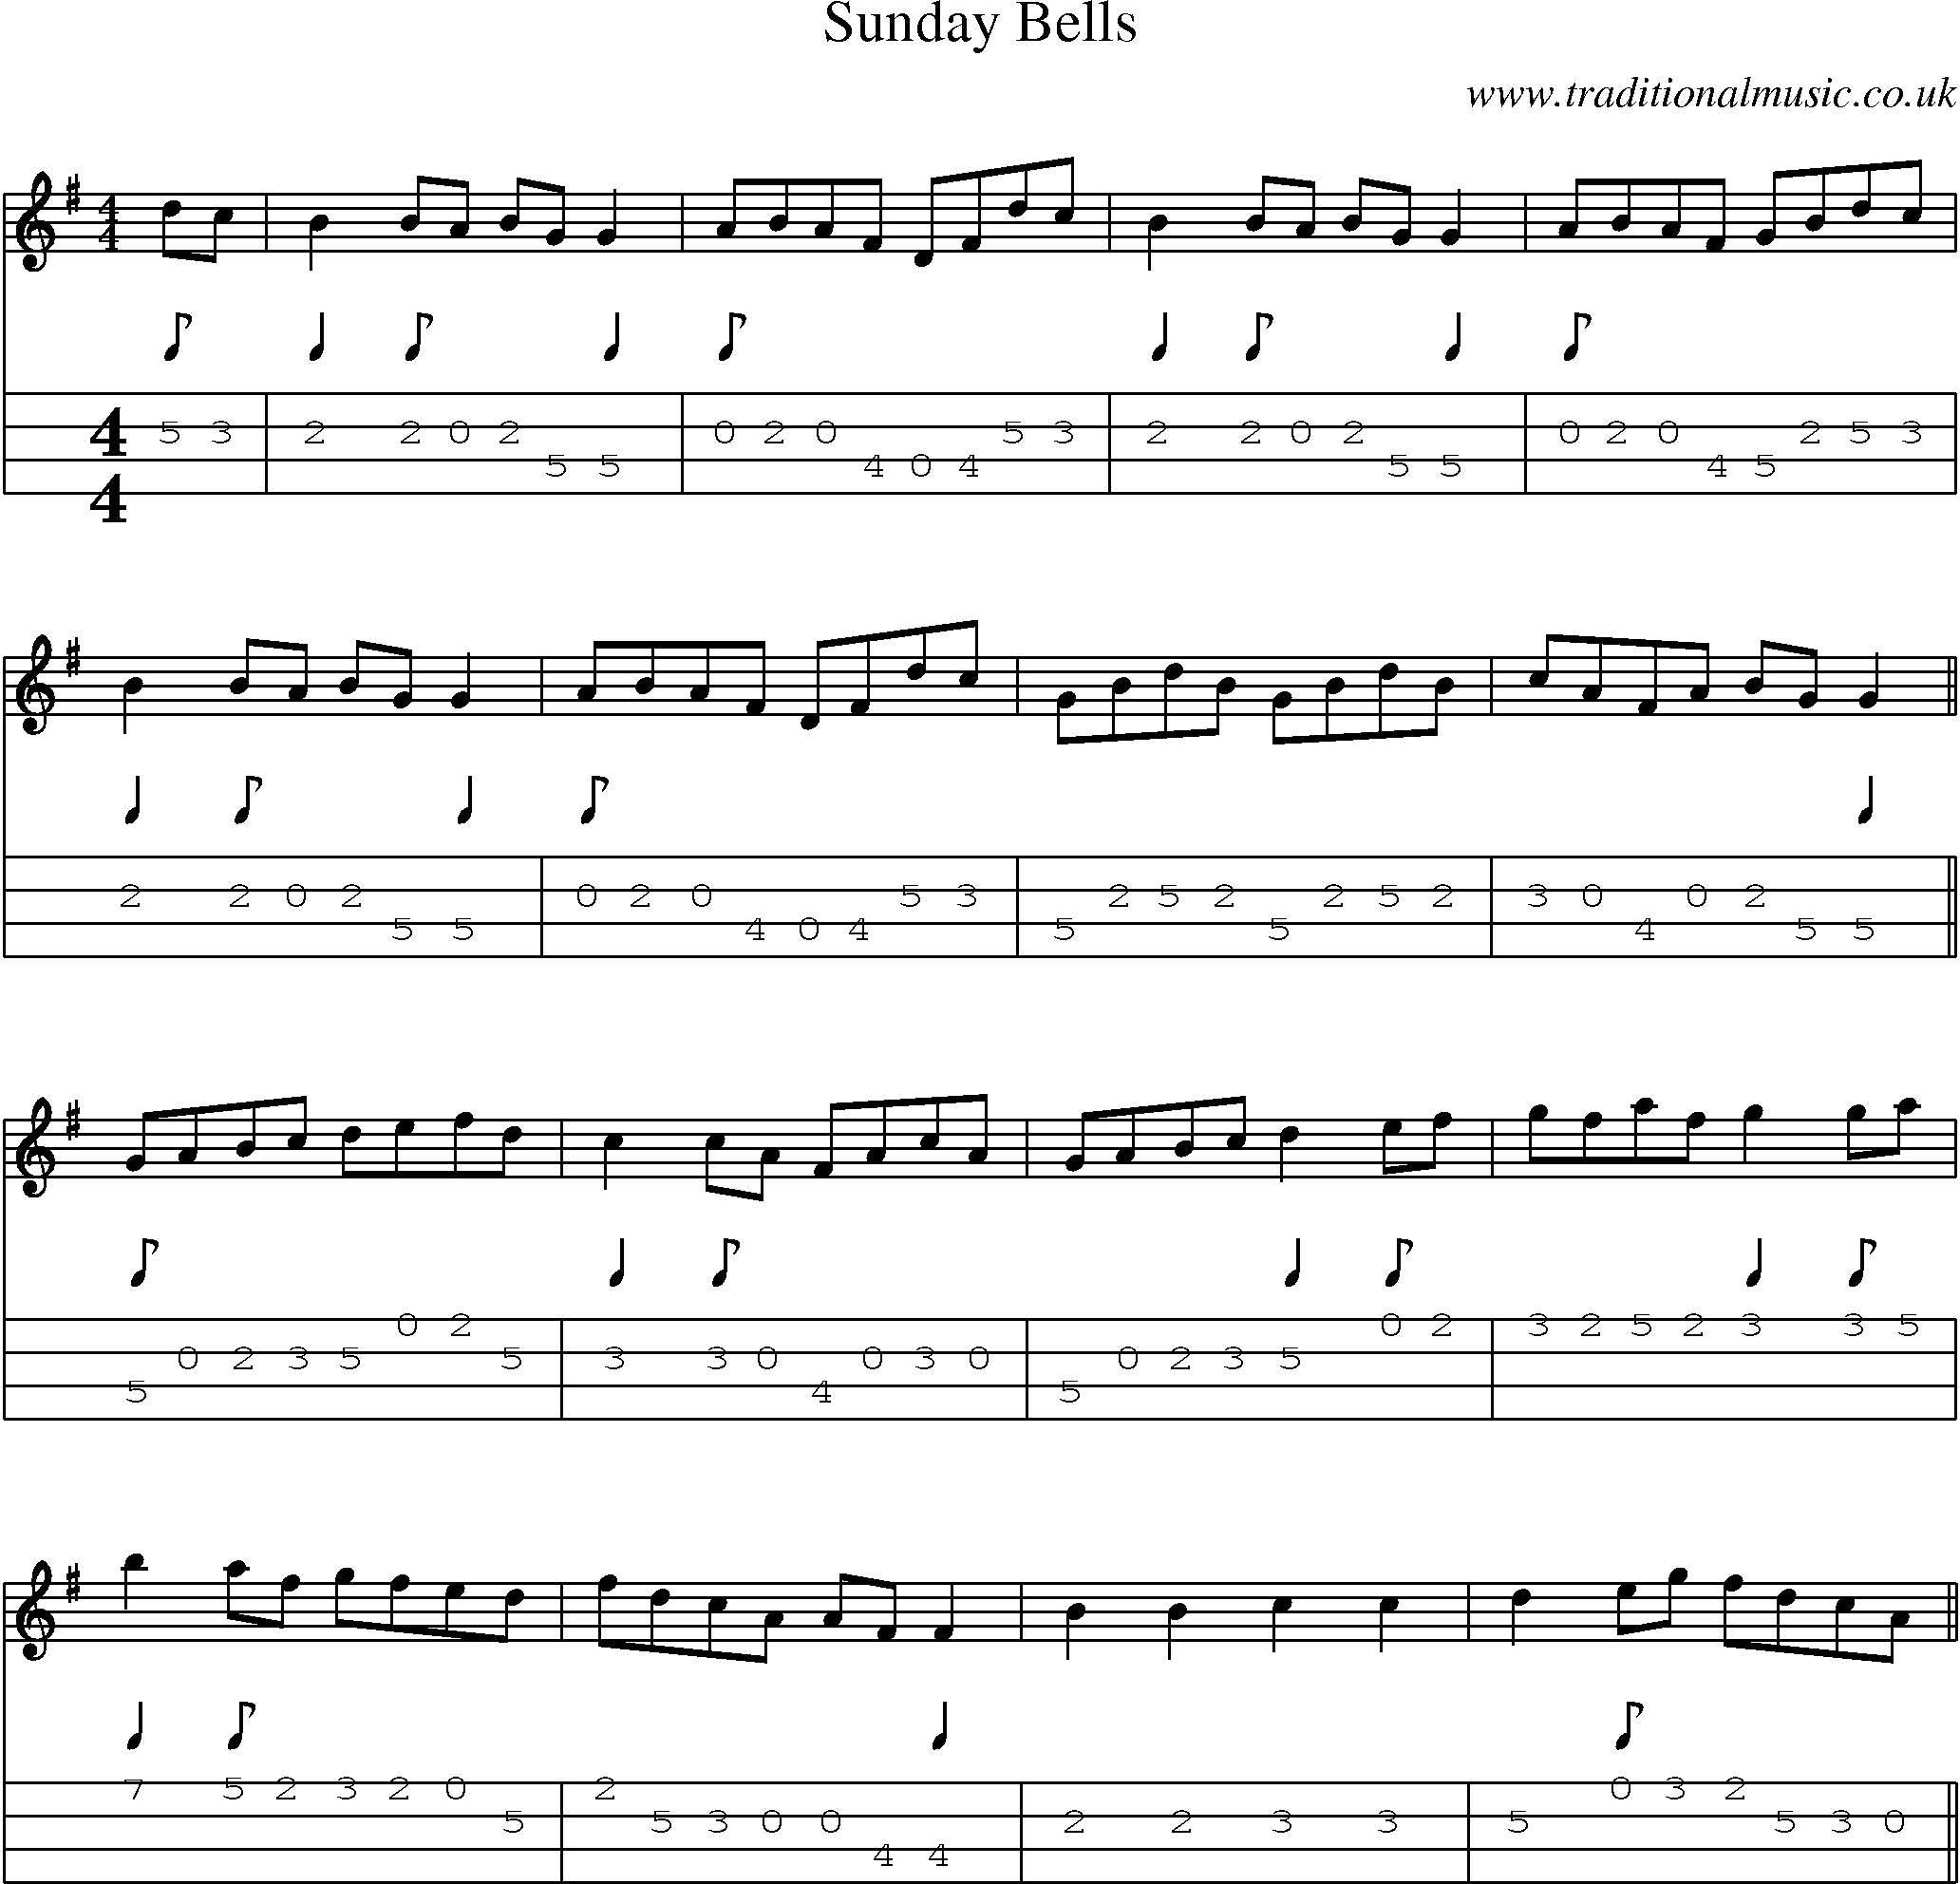 Music Score and Mandolin Tabs for Sunday Bells